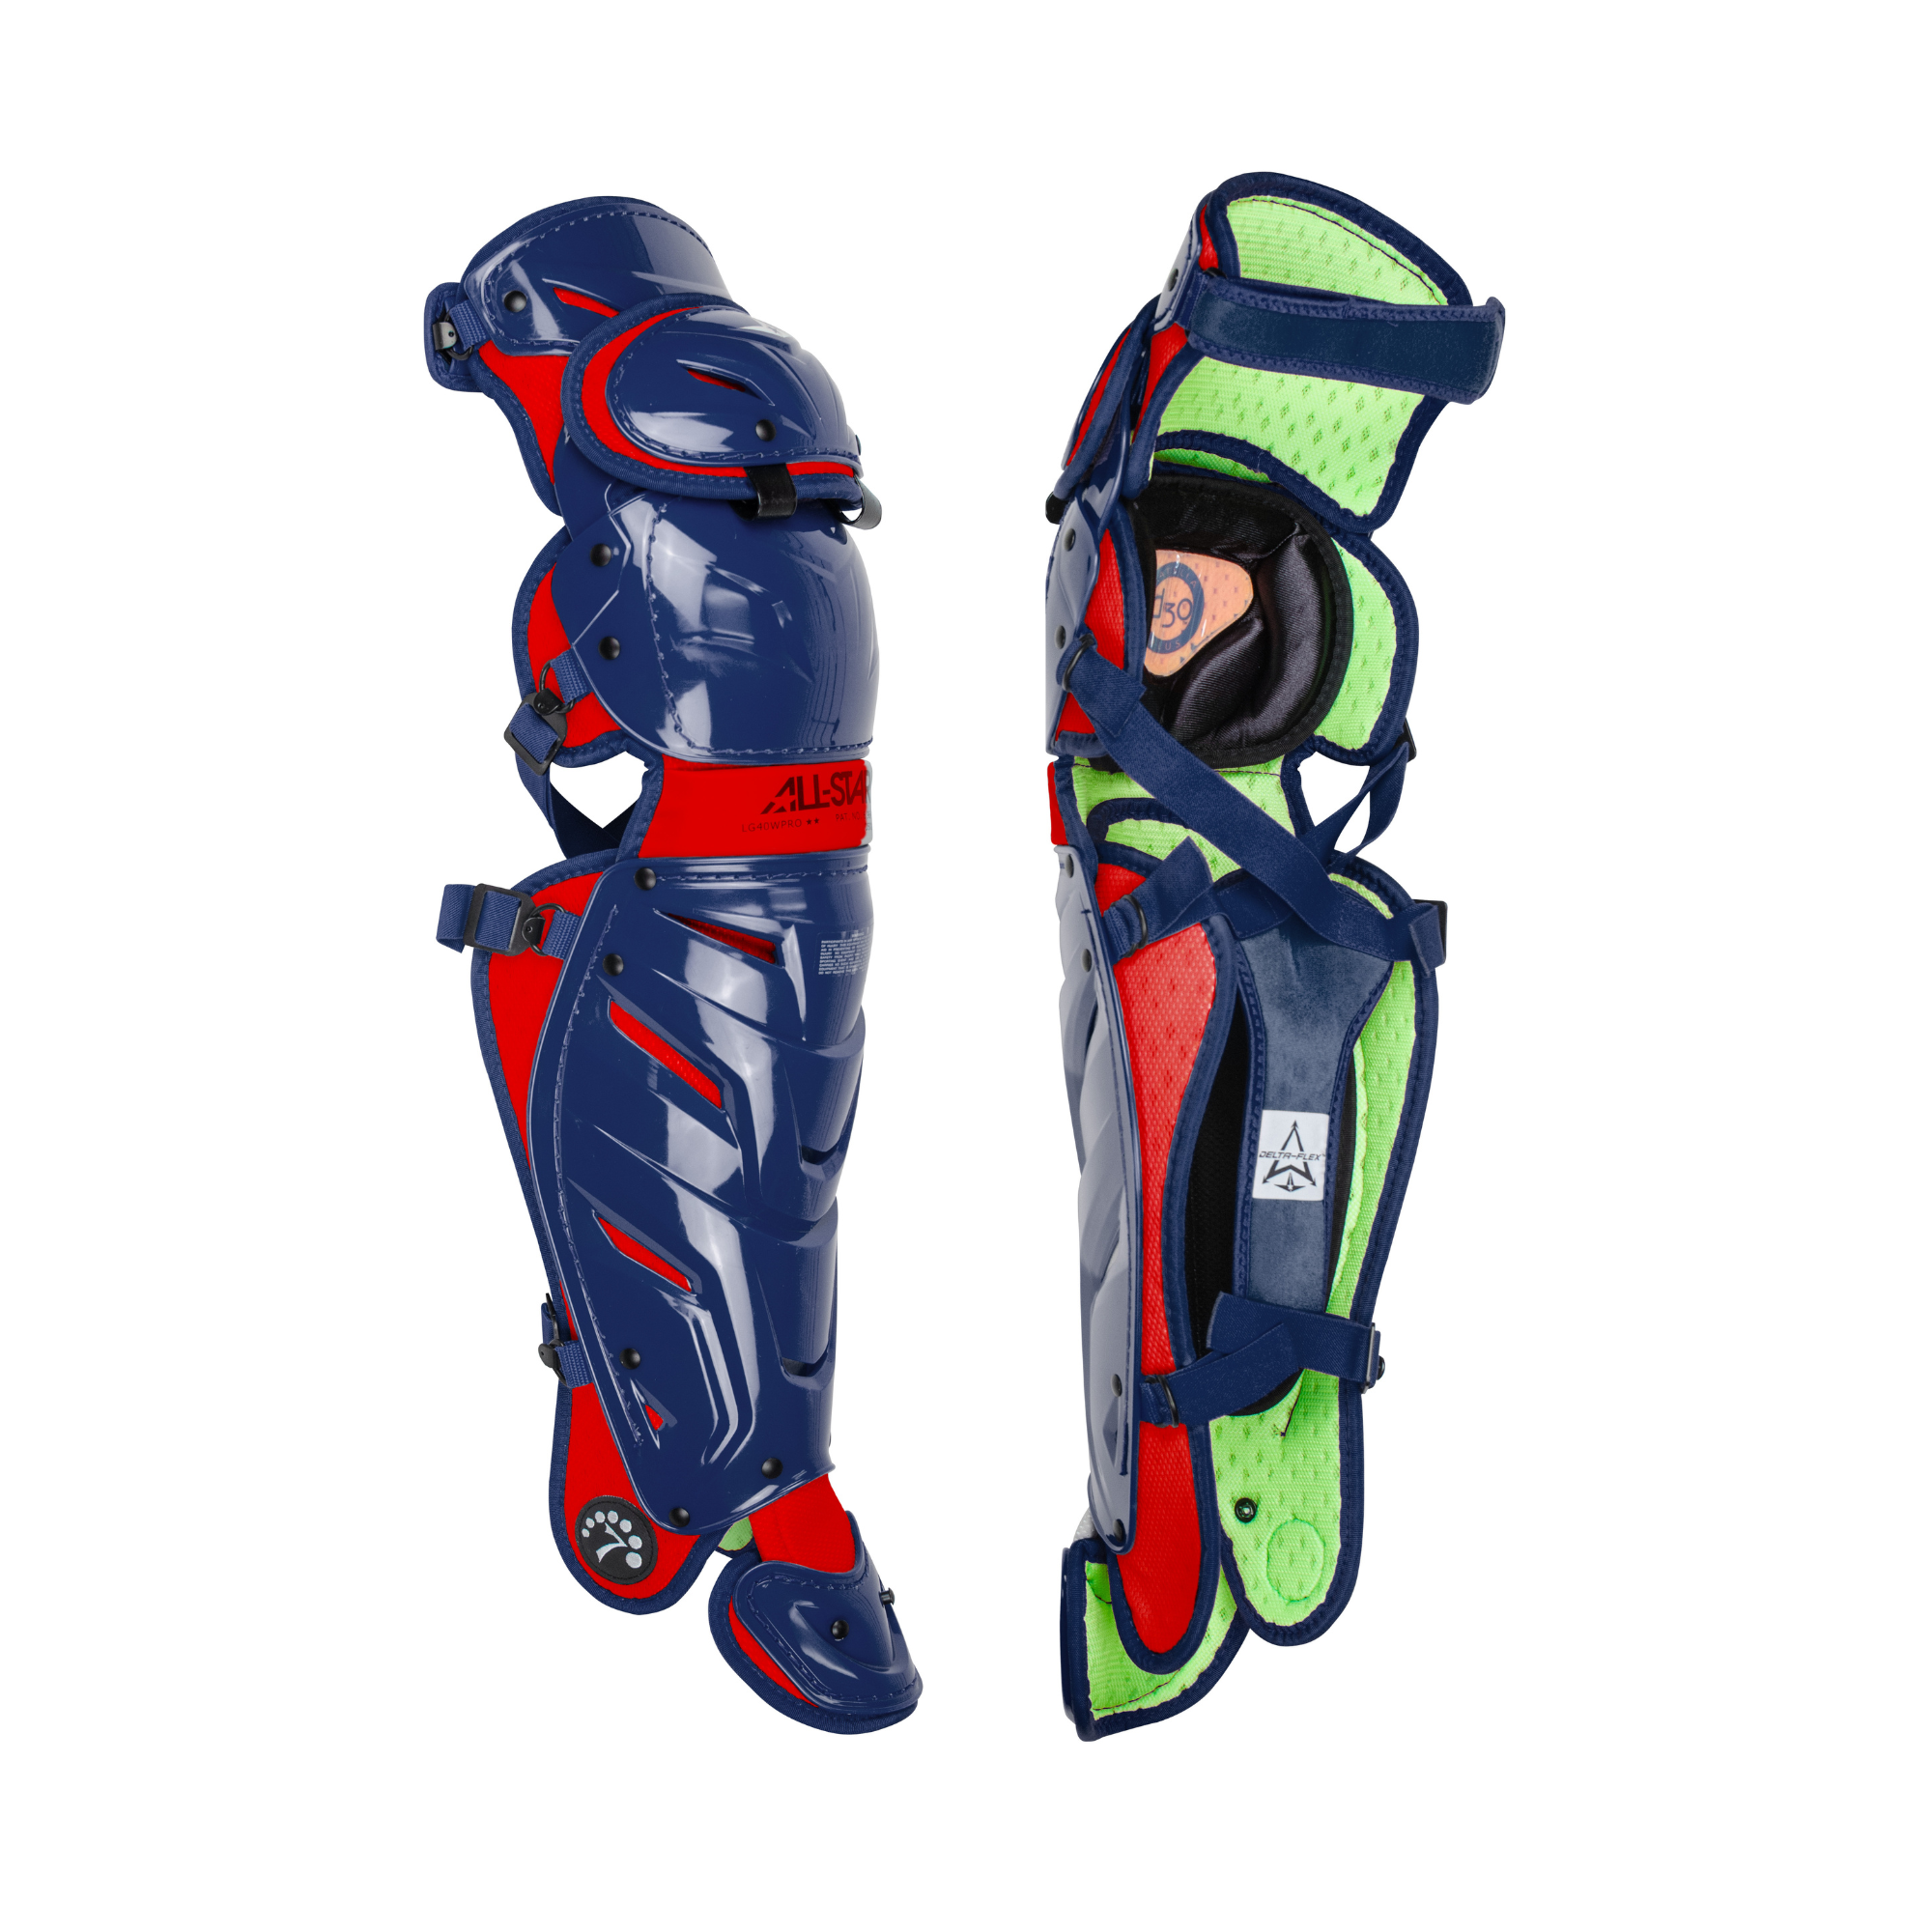 All-Star S7 AXIS Leg Guards / Two Tone Ages 9-12